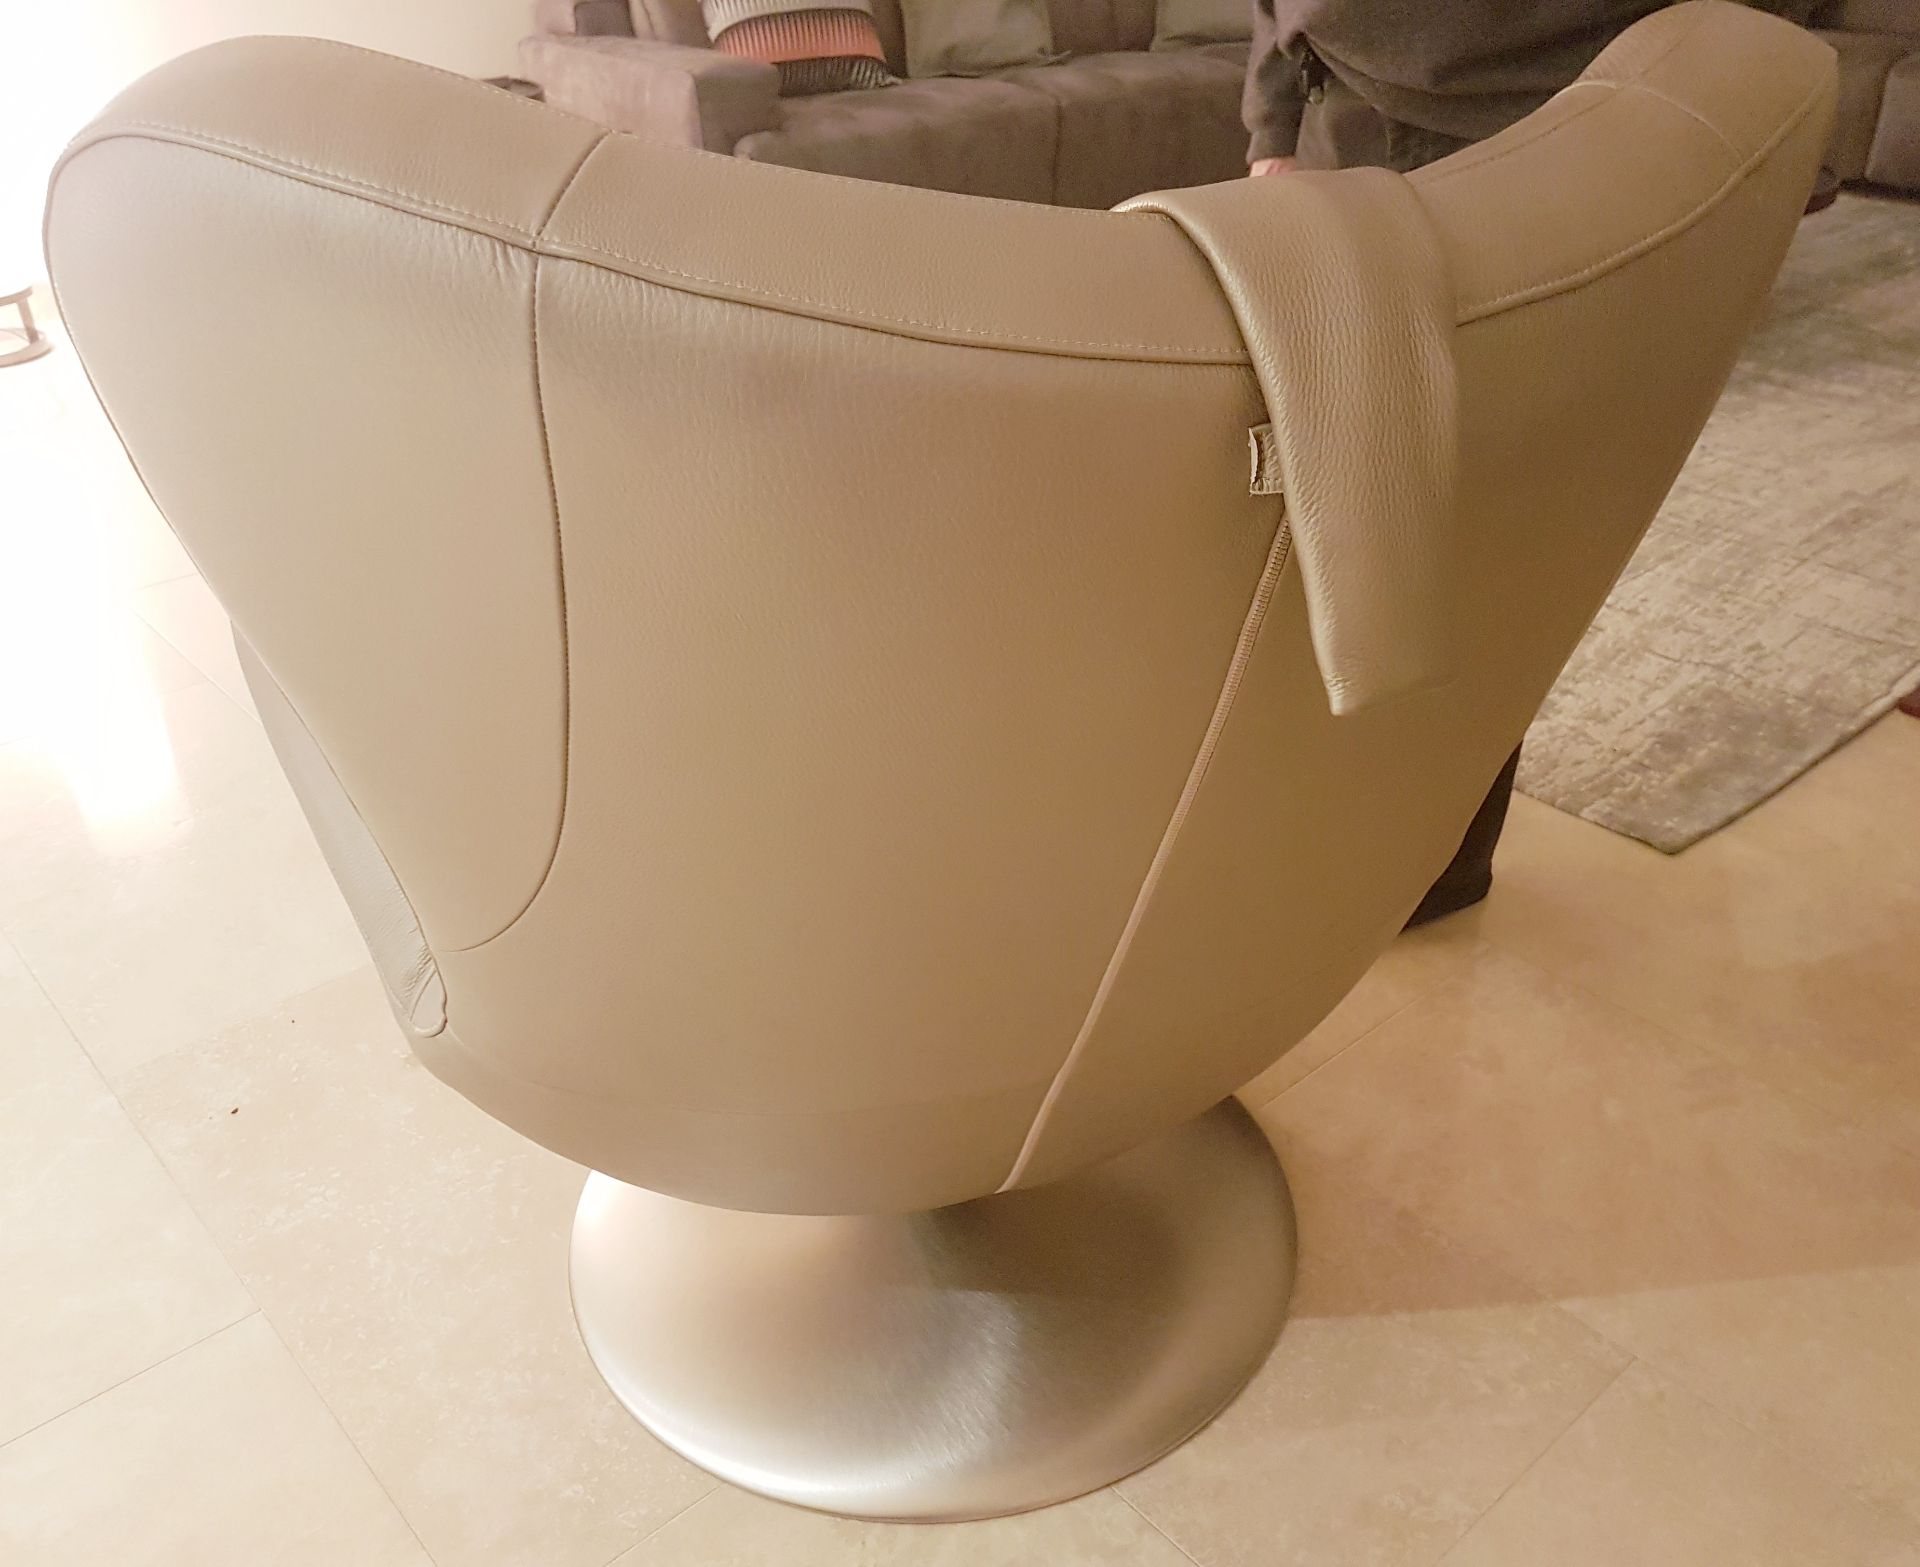 1 x Natuzzi Leather Upholstered Swivel Chair With In-built Speakers - Ref: MT643 - Stunning Chair In - Image 3 of 5